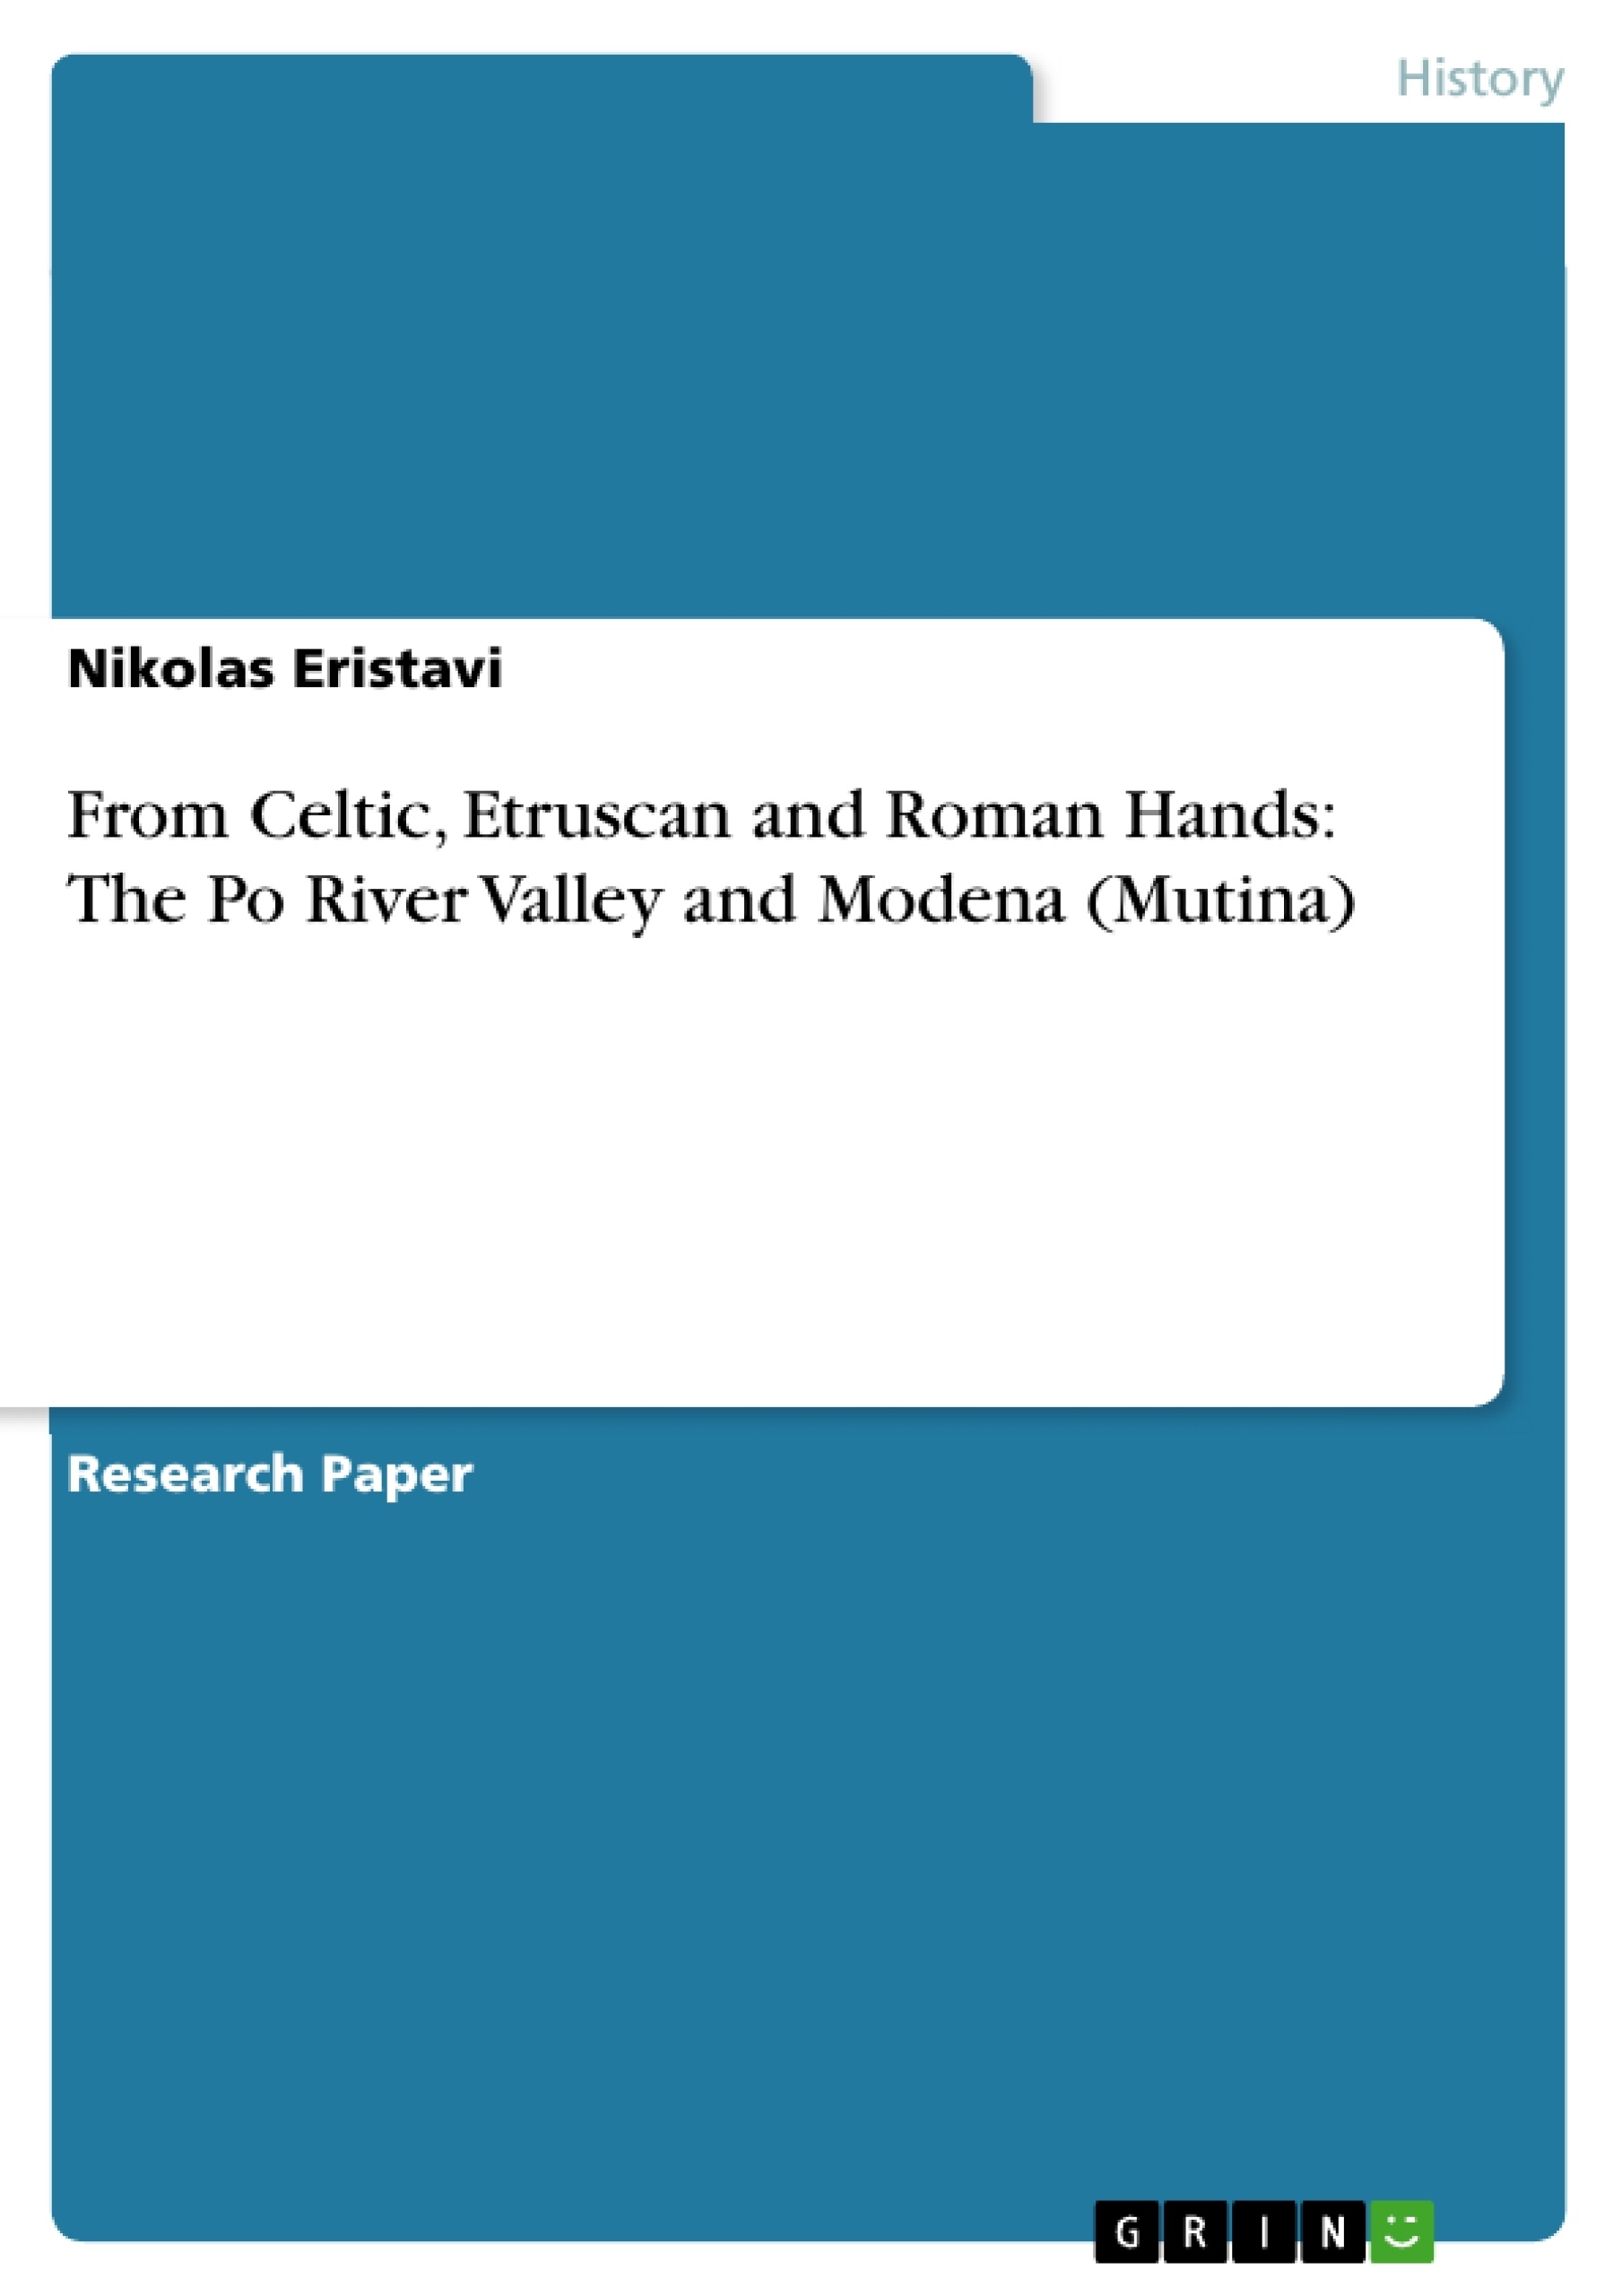 Title: From Celtic, Etruscan and Roman Hands: The Po River Valley and Modena (Mutina)